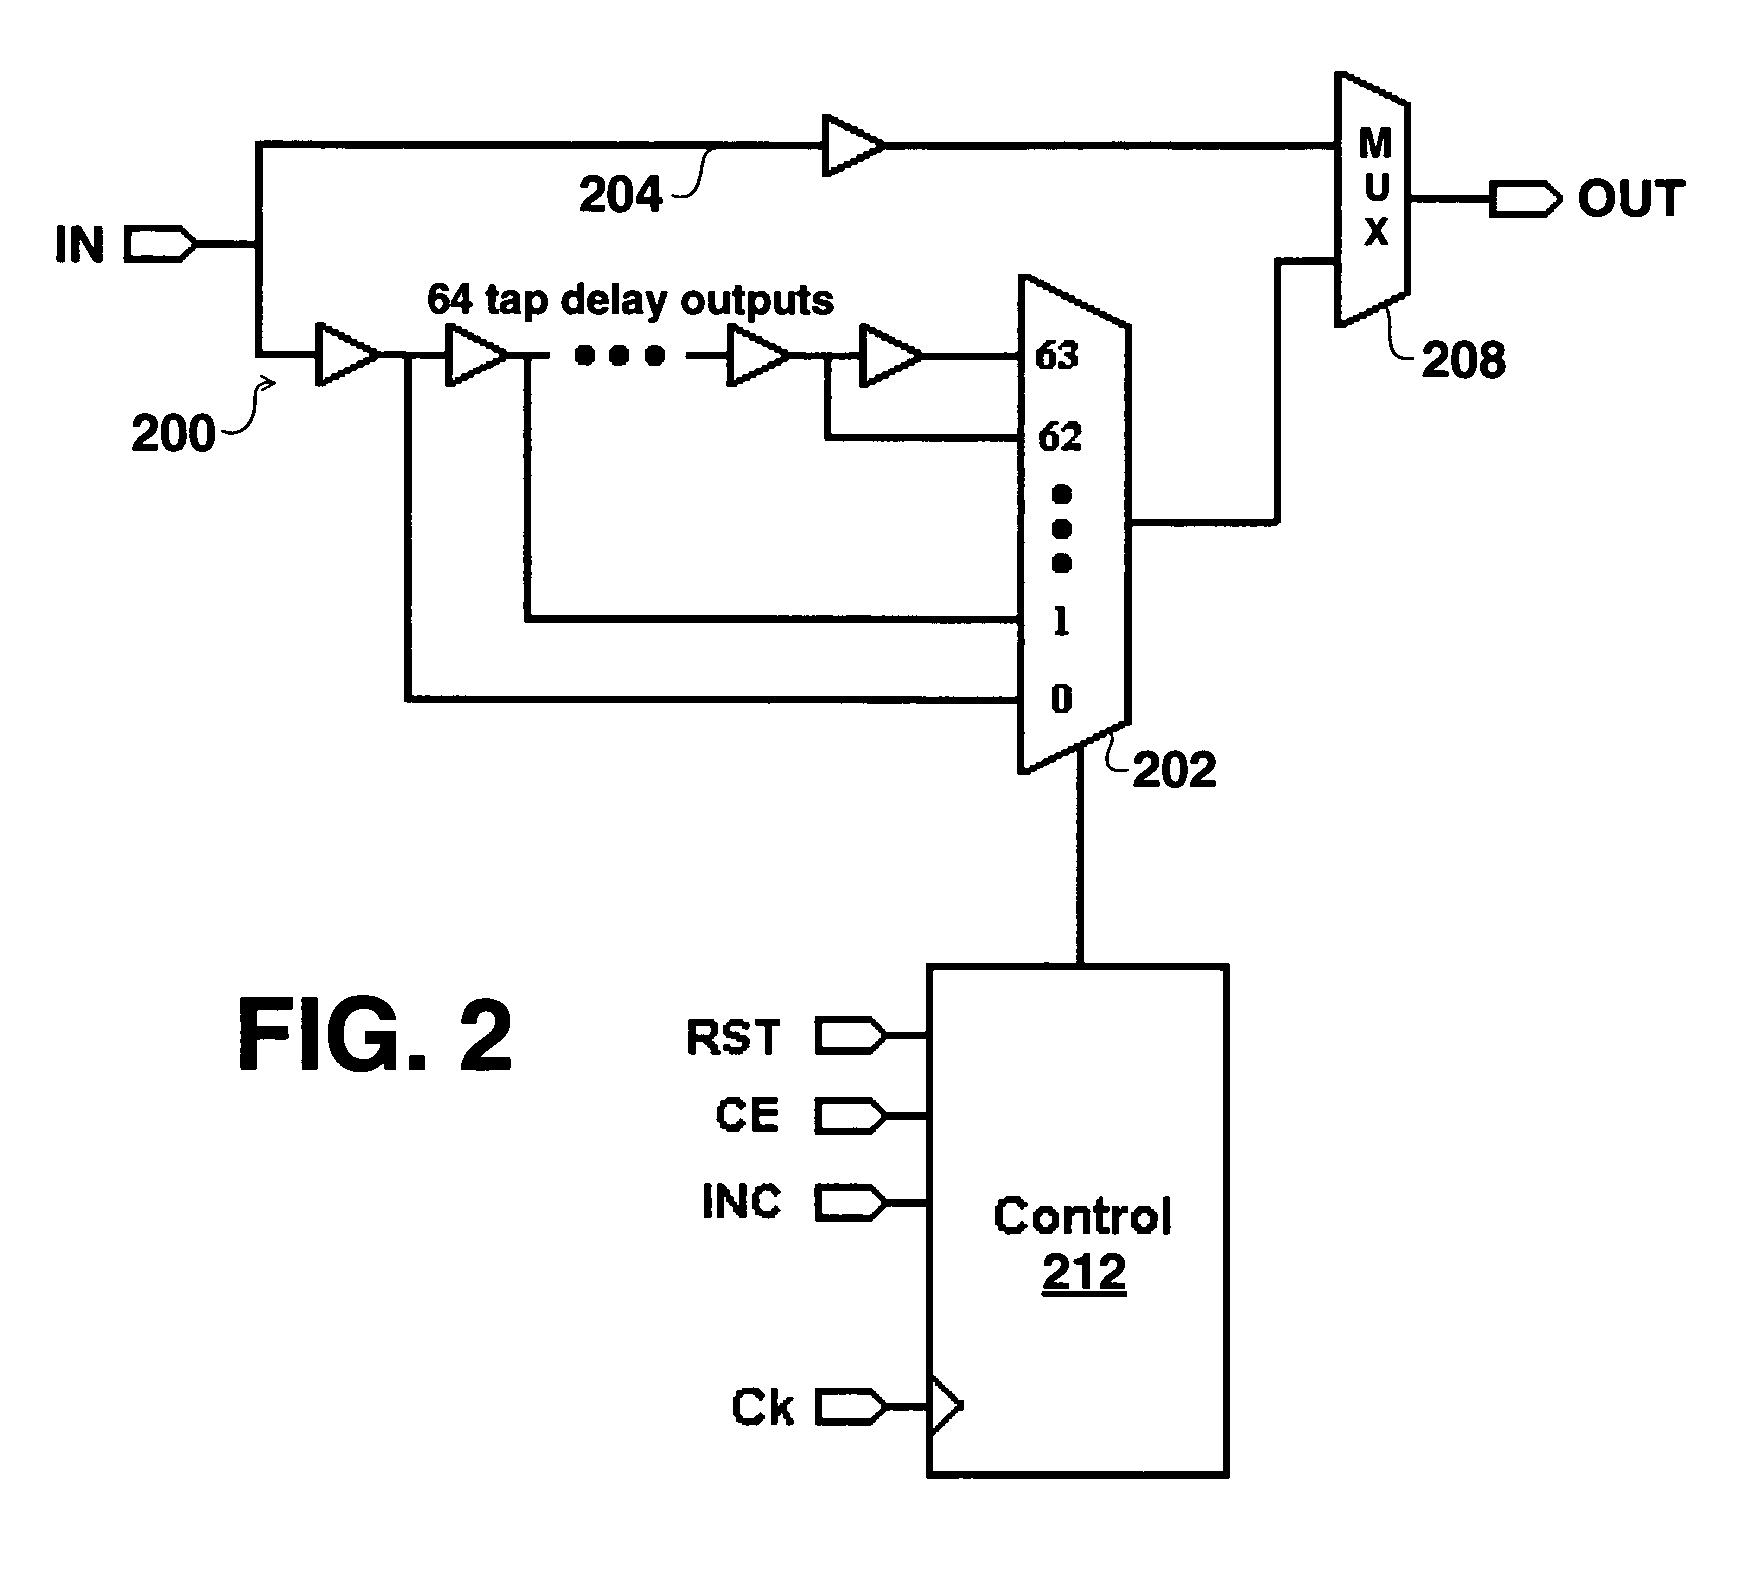 Method of recovering data in asynchronous applications